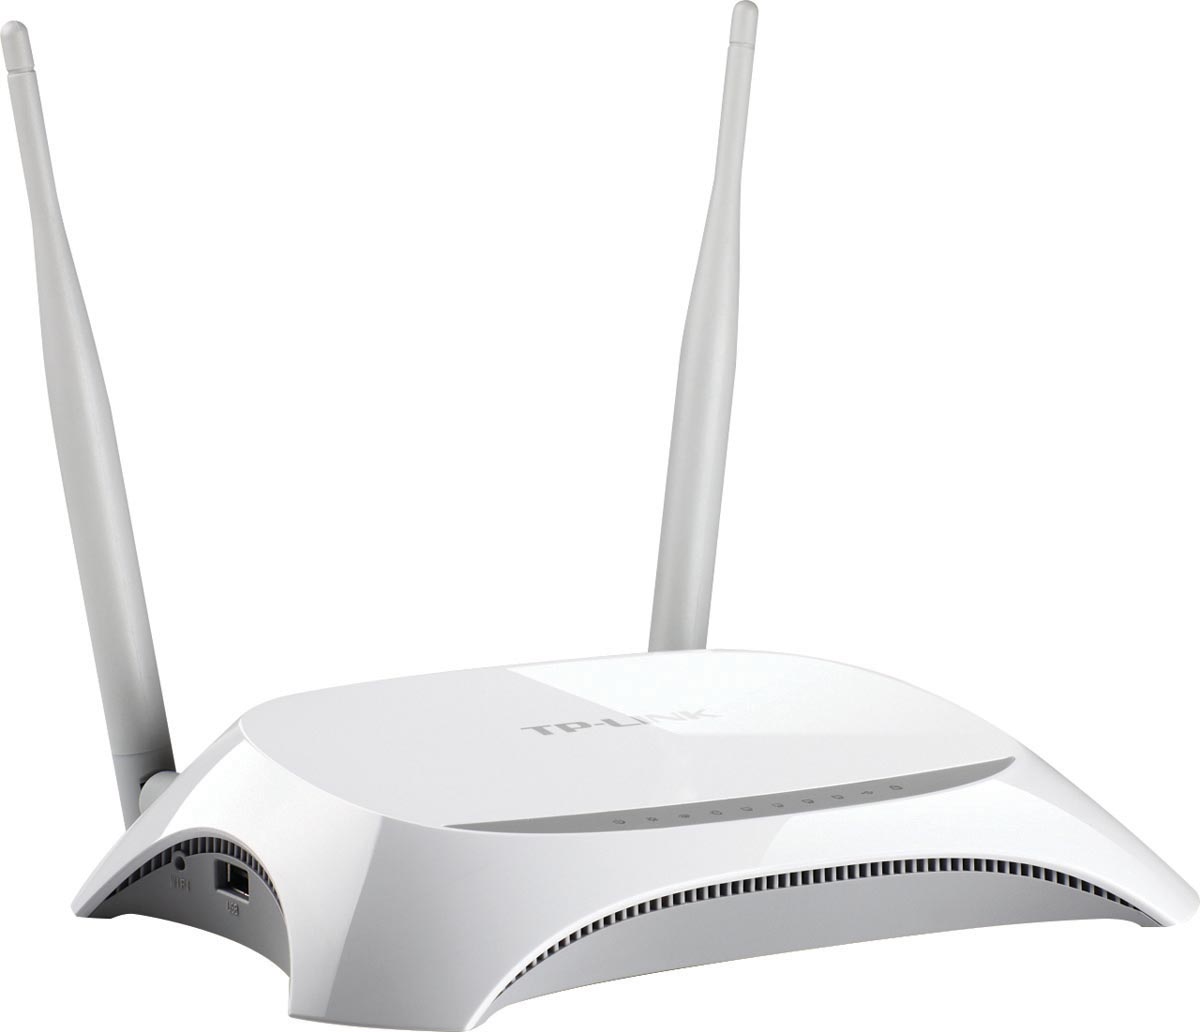 Roteador Wireless 3g/4g N 300mbps Tl-mr3420